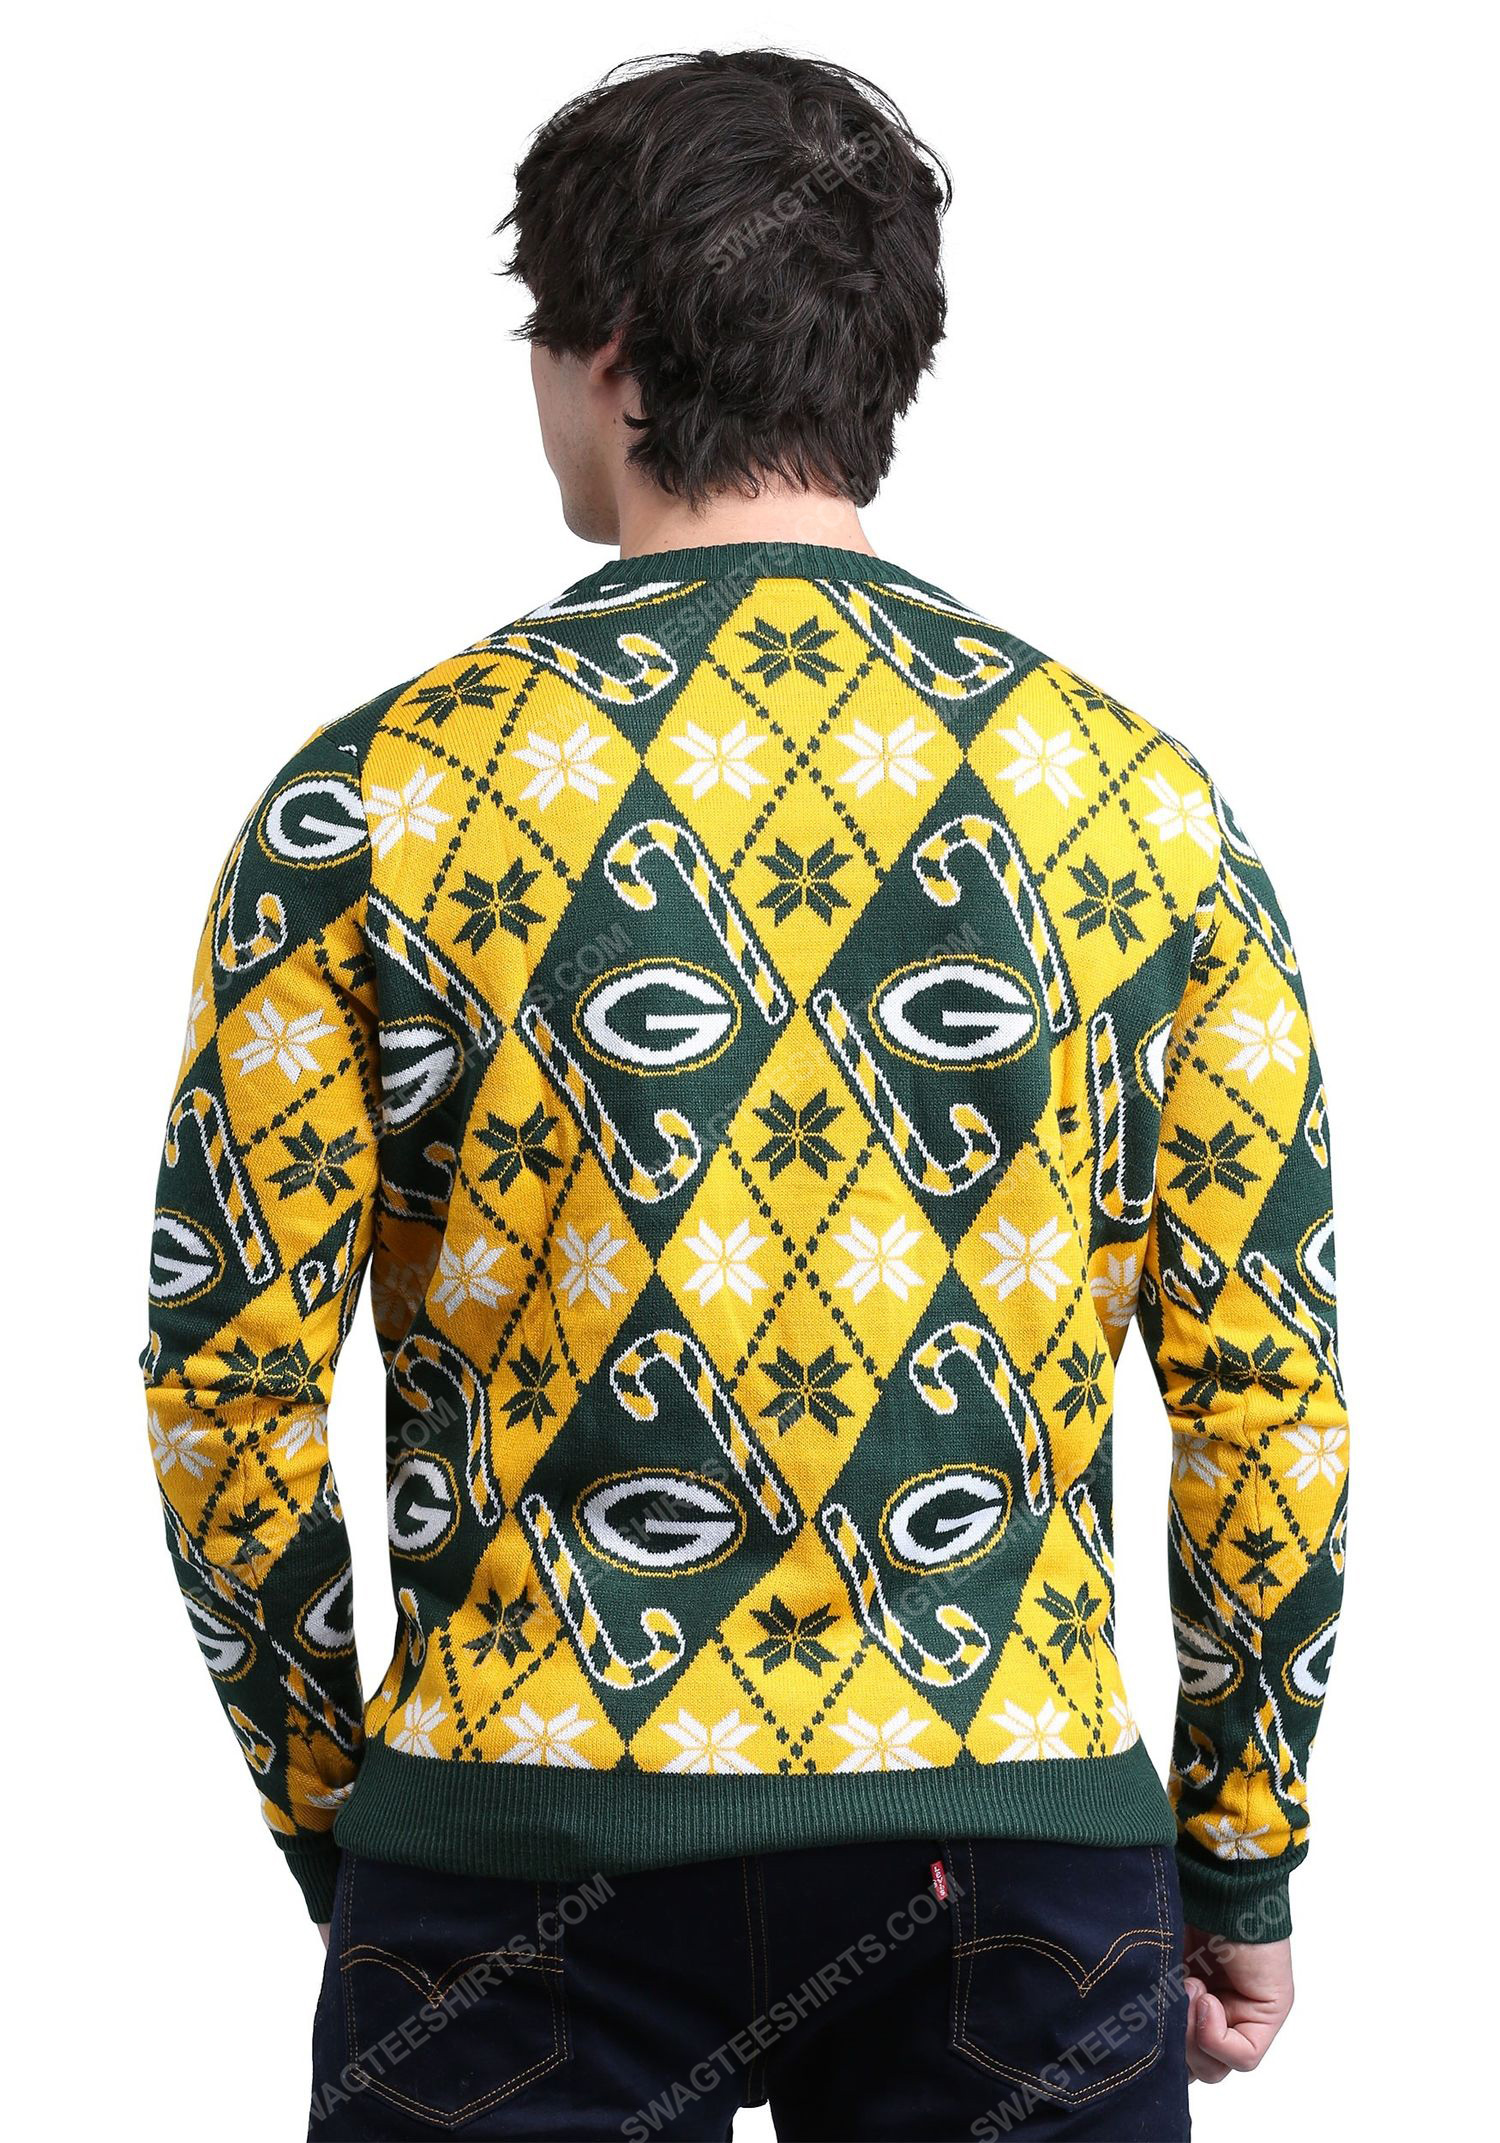 Green bay packers candy cane full print ugly christmas sweater 3 - Copy